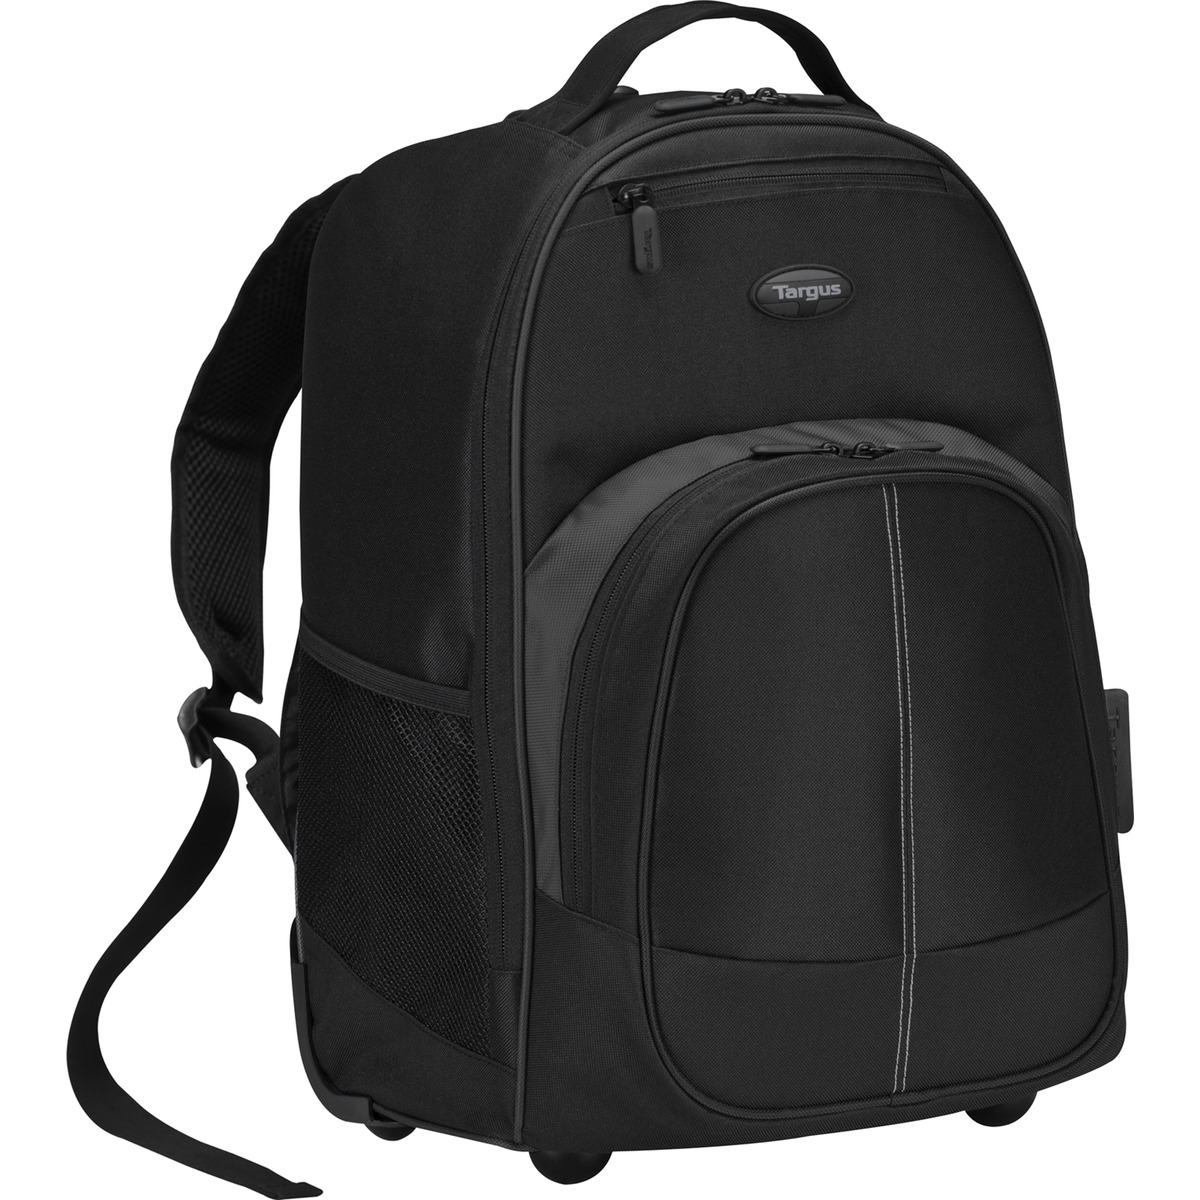 Targus 16" Compact Rolling Laptop Backpack, Black - image 2 of 10